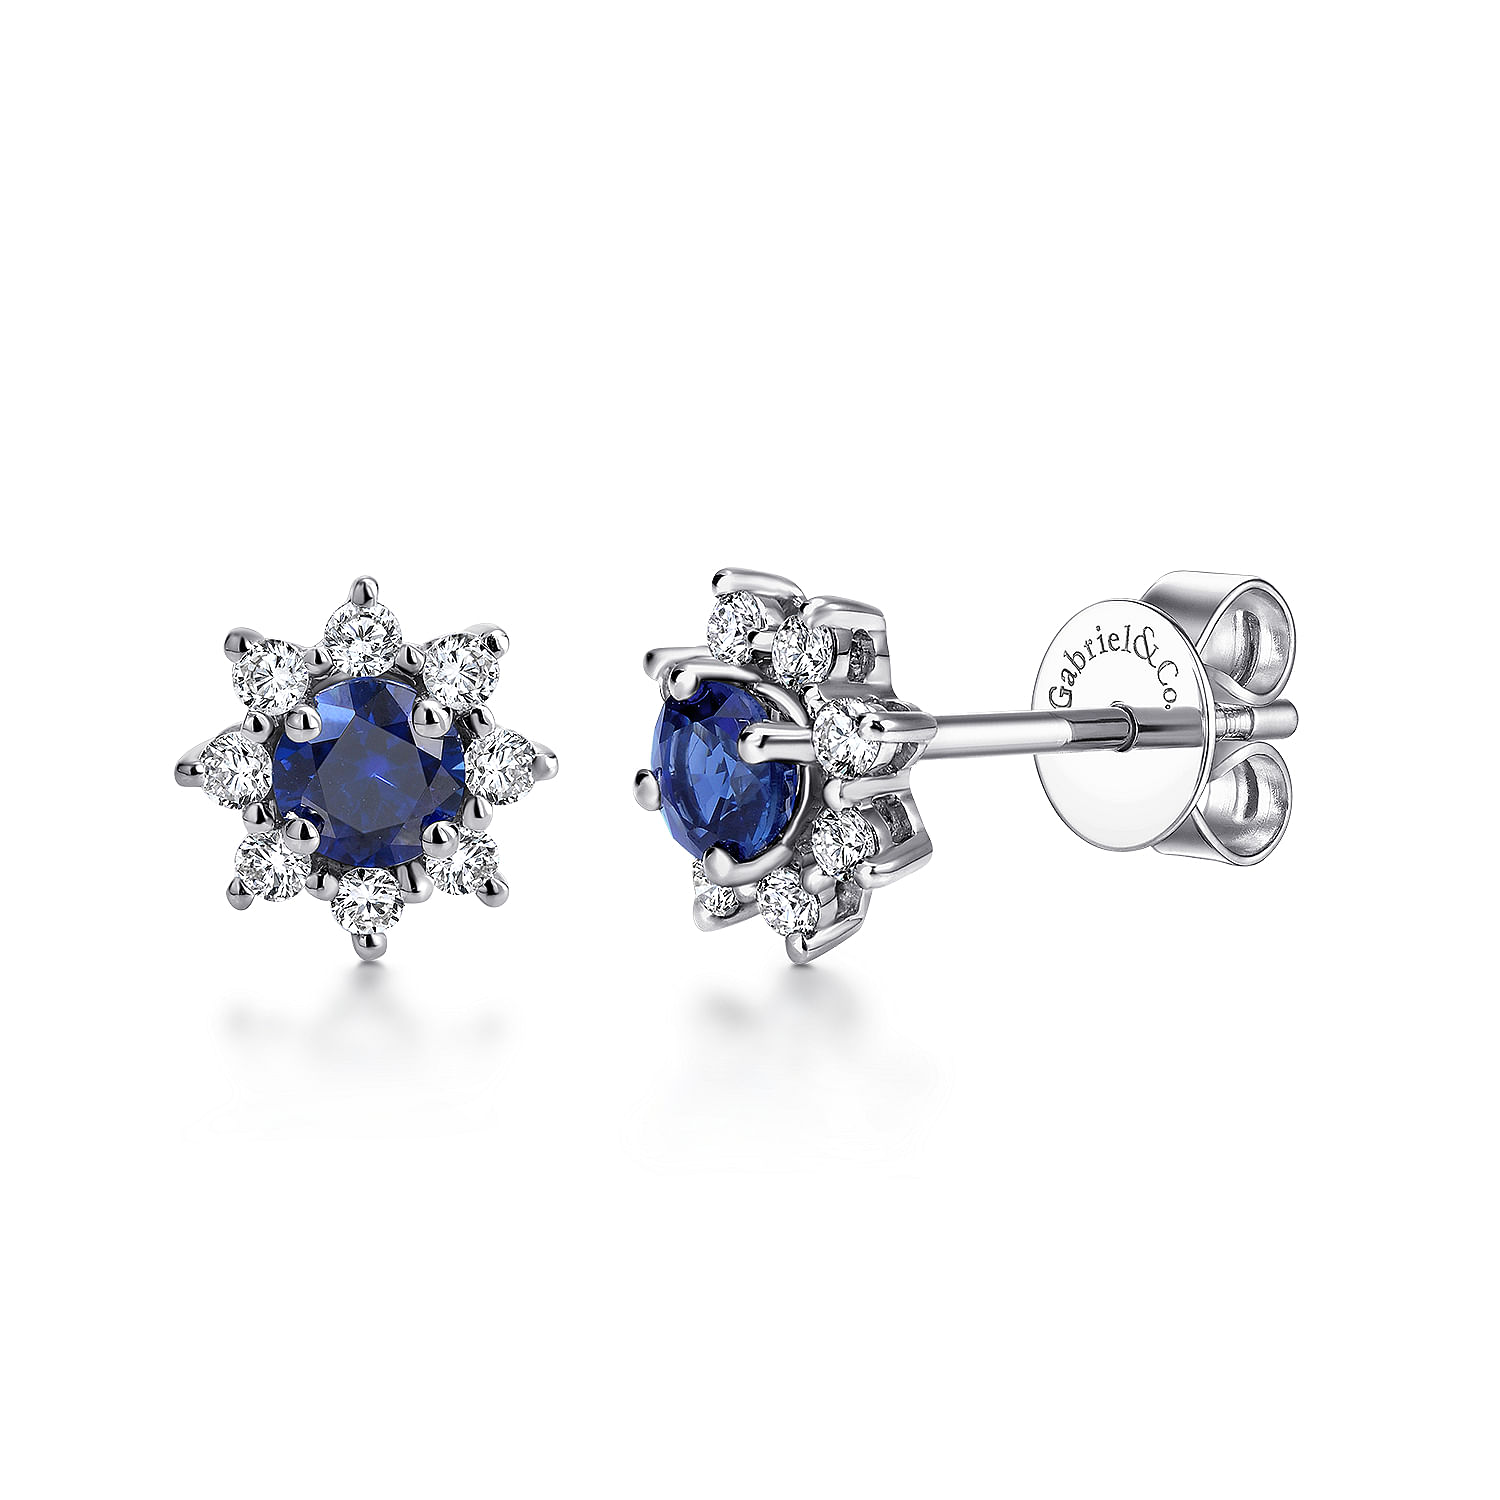 14K-White-Gold-Round-Sapphire-and-Diamond-Halo-Stud-Earrings1